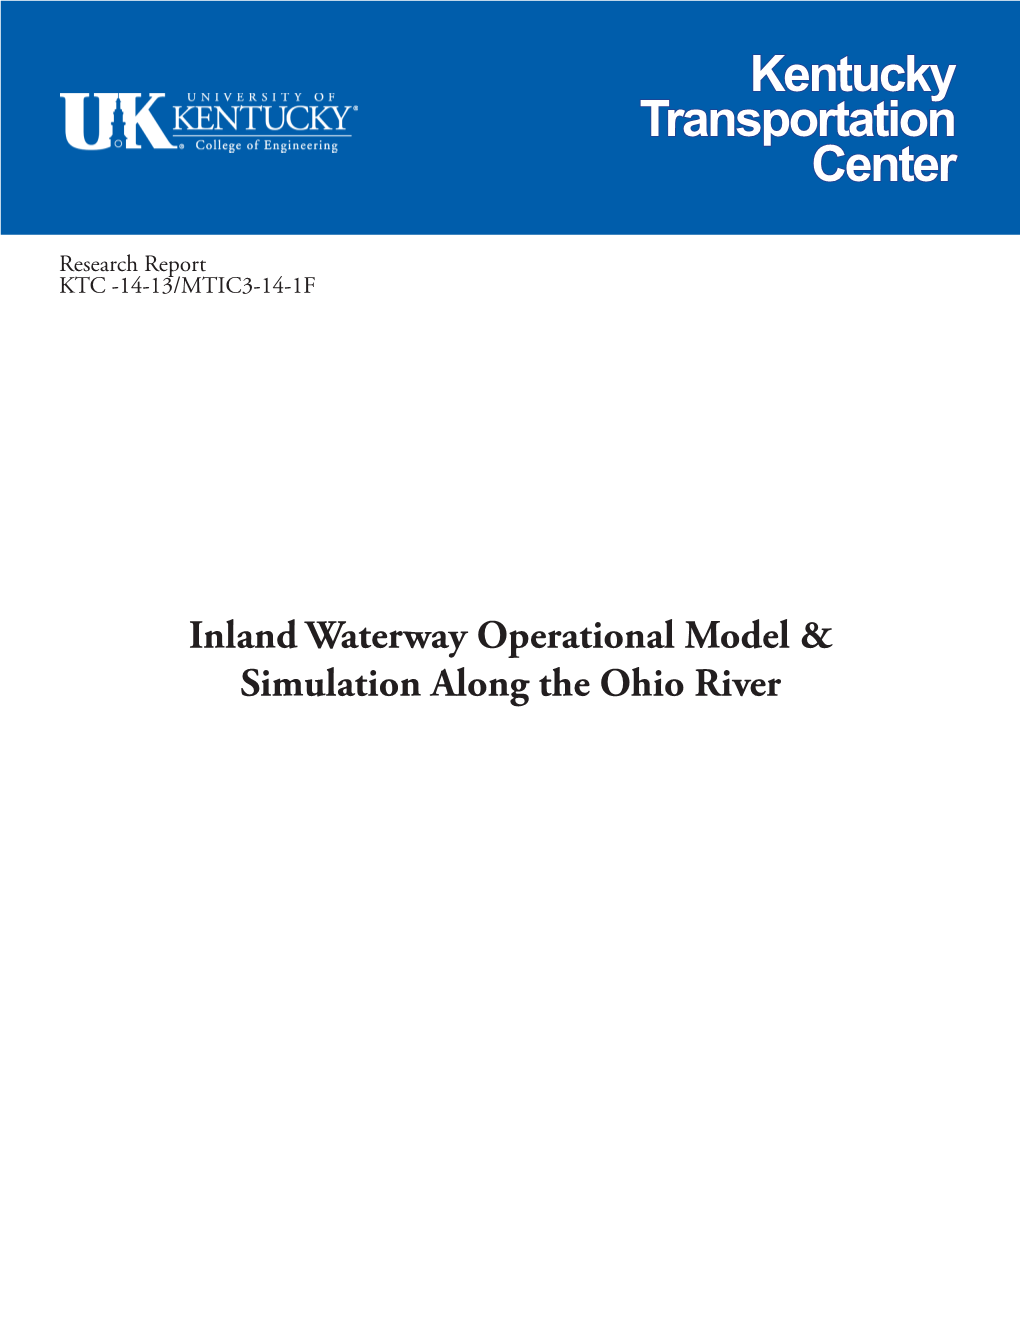 Inland Waterway Operational Model & Simulation Along the Ohio River